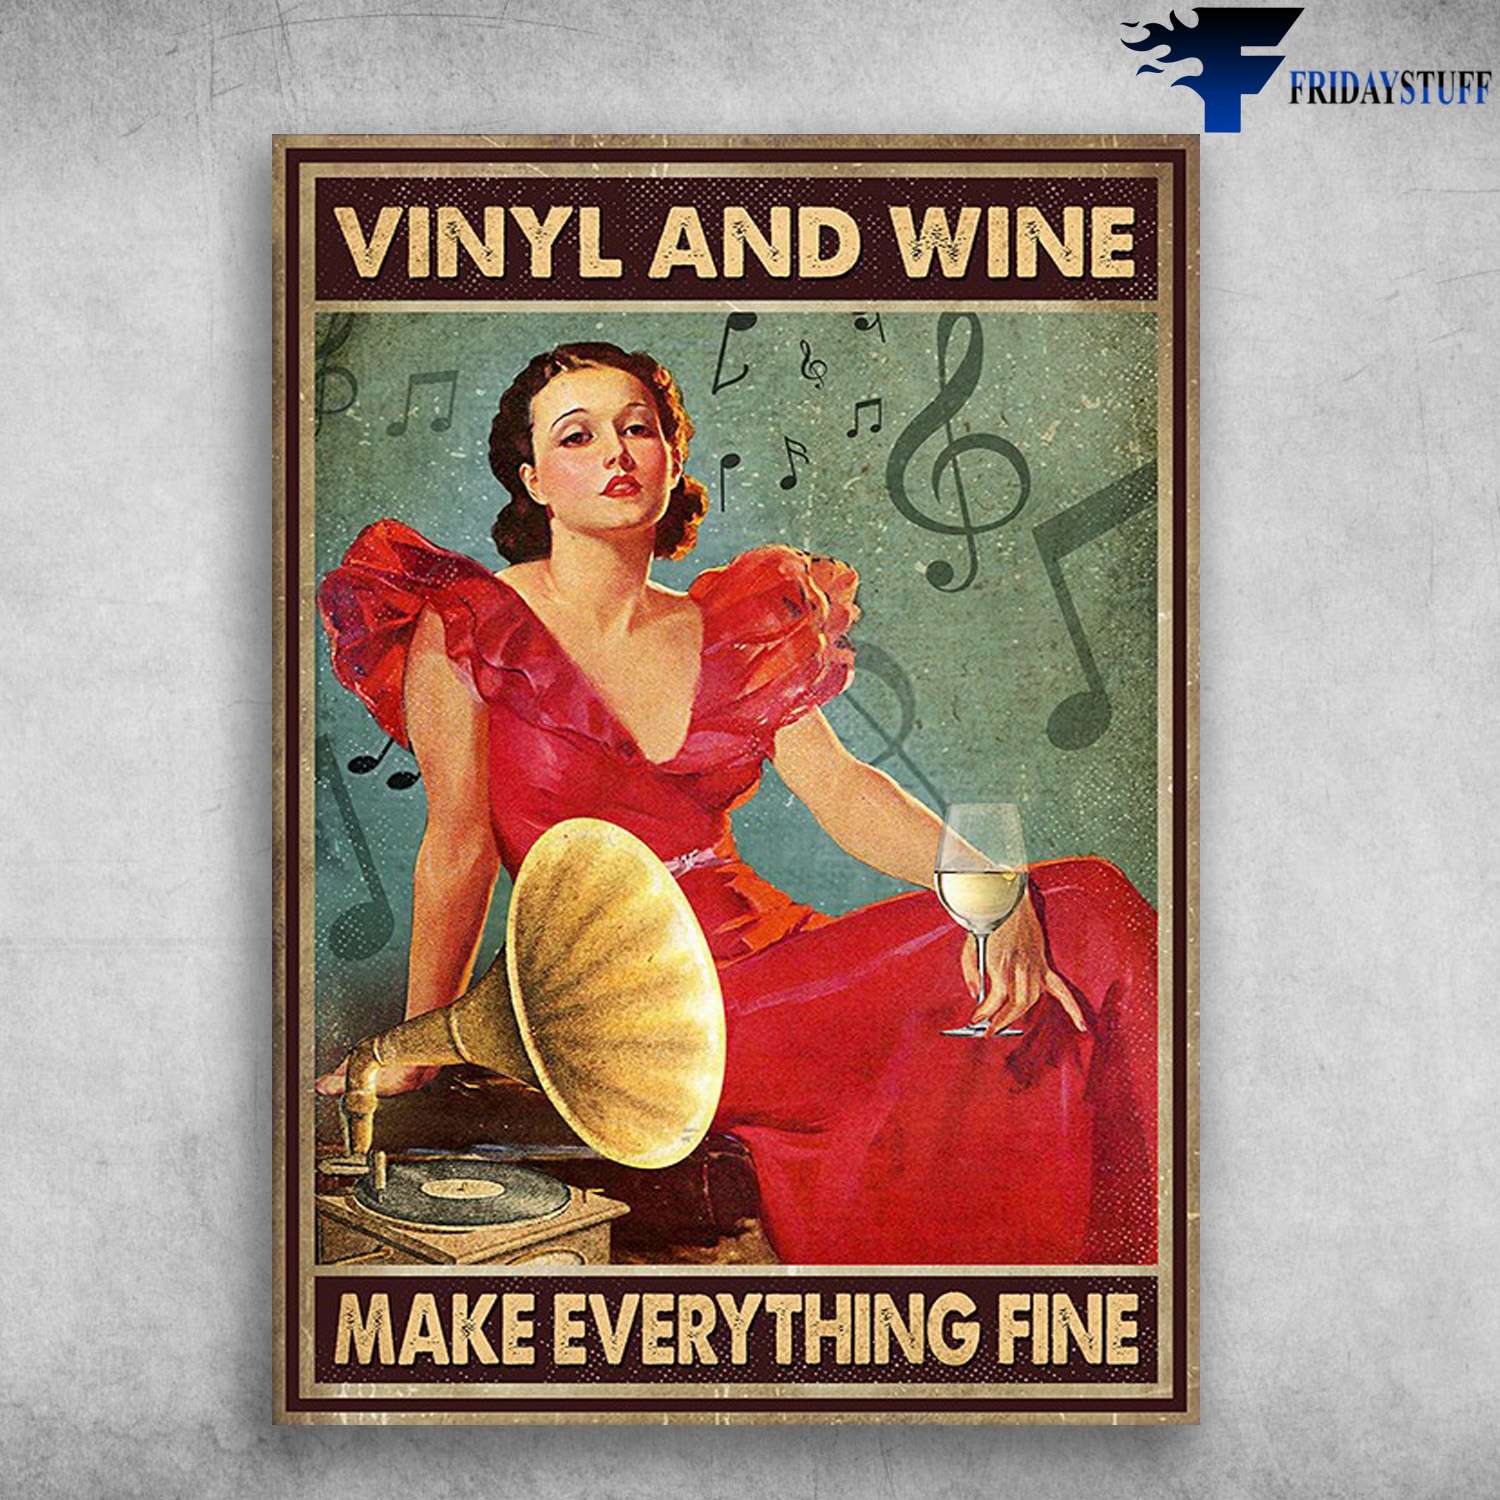 Girl Music And Wine - Vinyl And Wine, Make Everything Fine